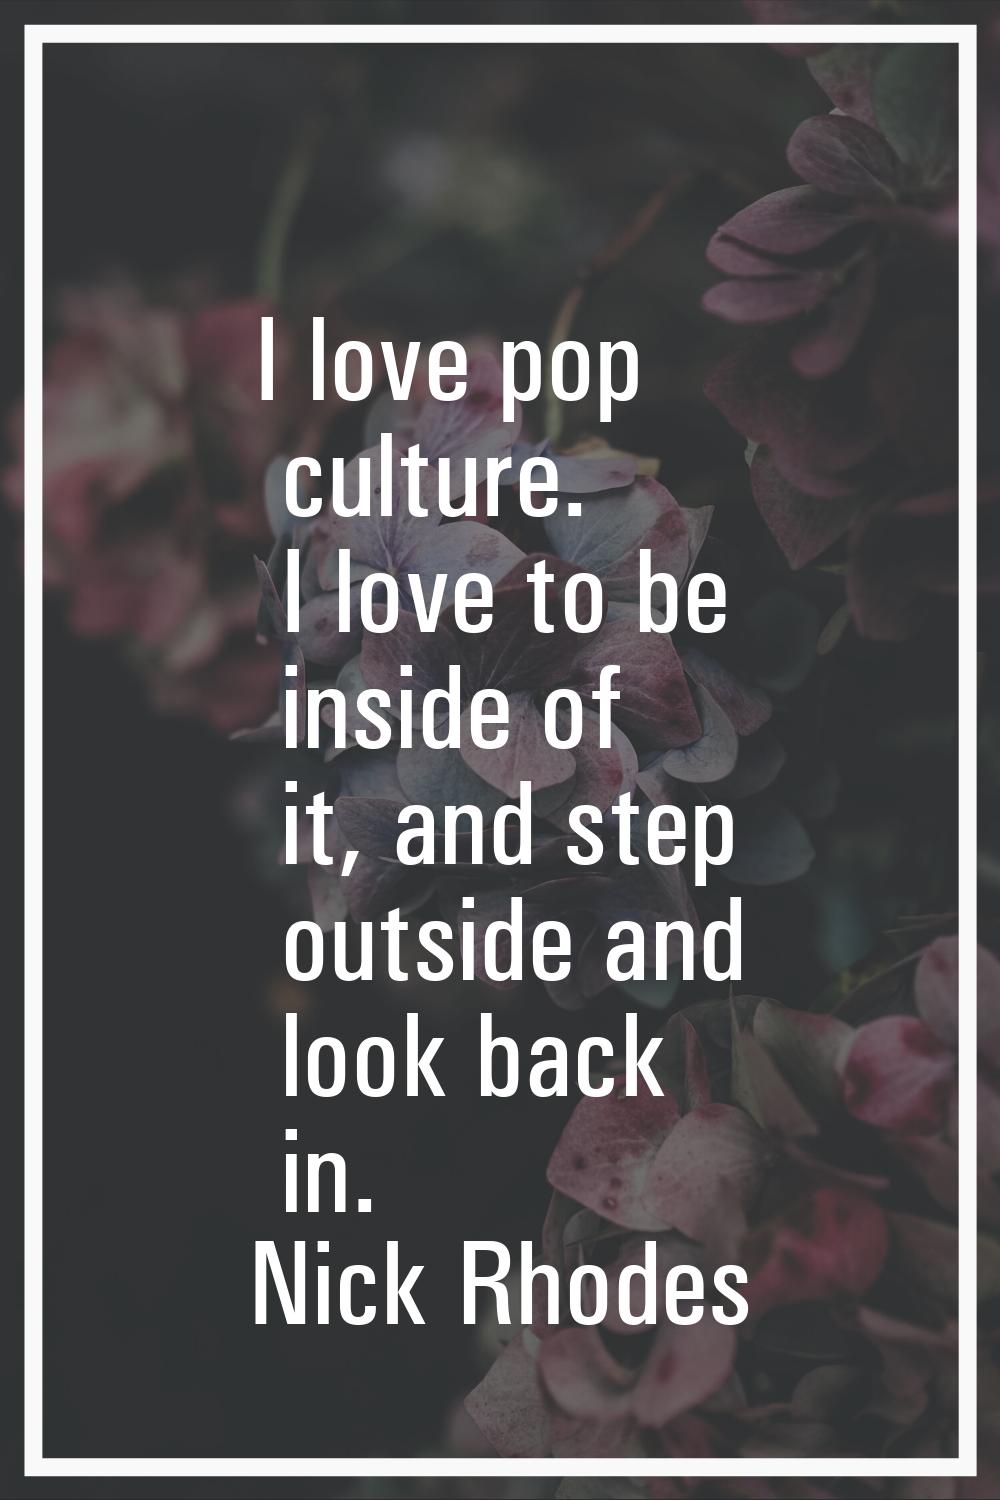 I love pop culture. I love to be inside of it, and step outside and look back in.